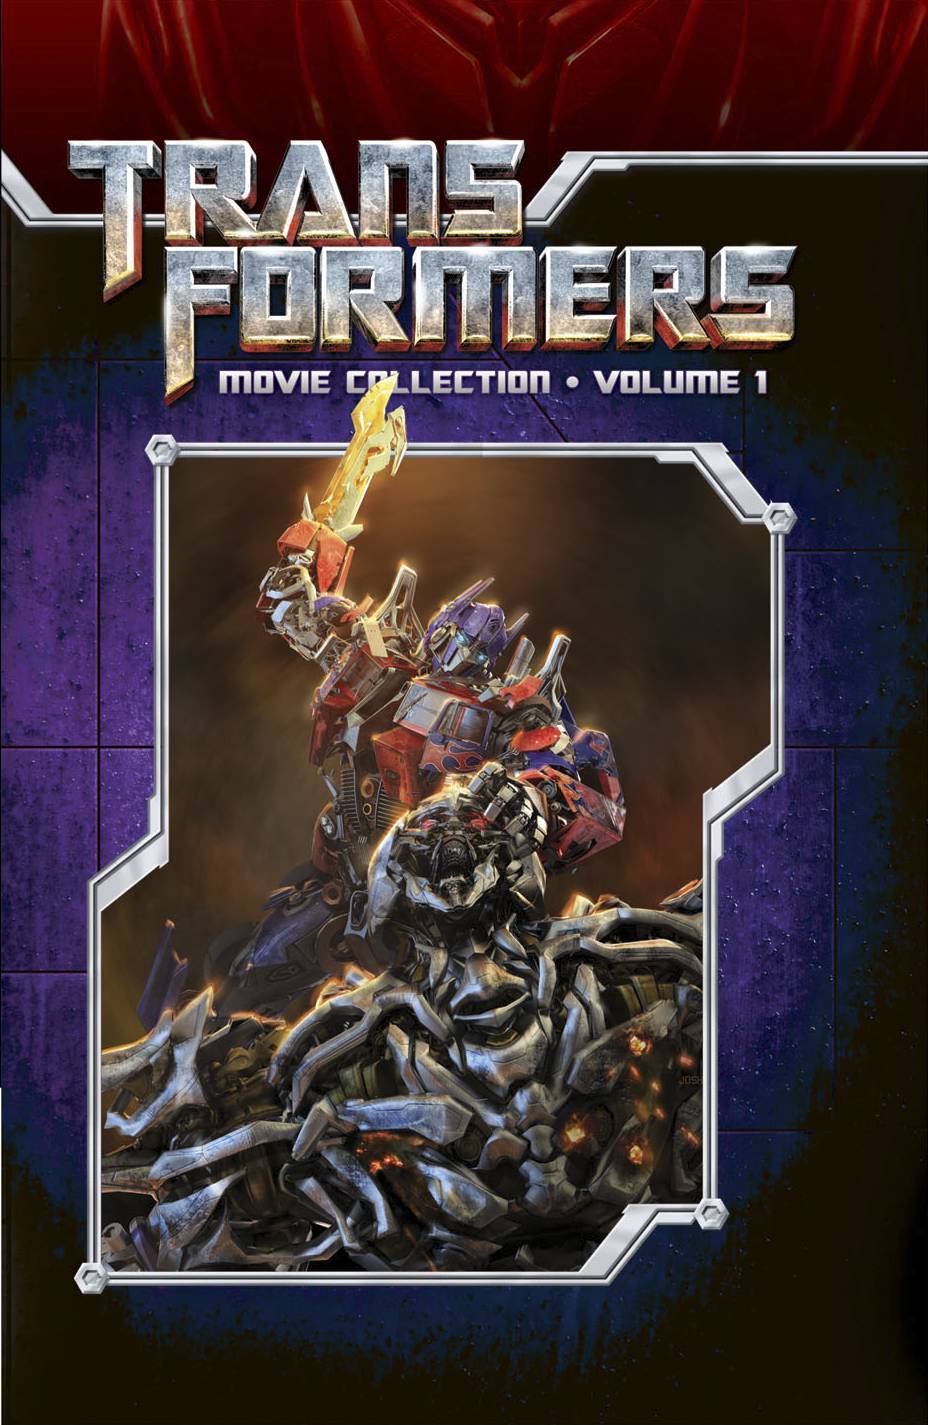 Transformers Movie Collection Hardcover Volume 1